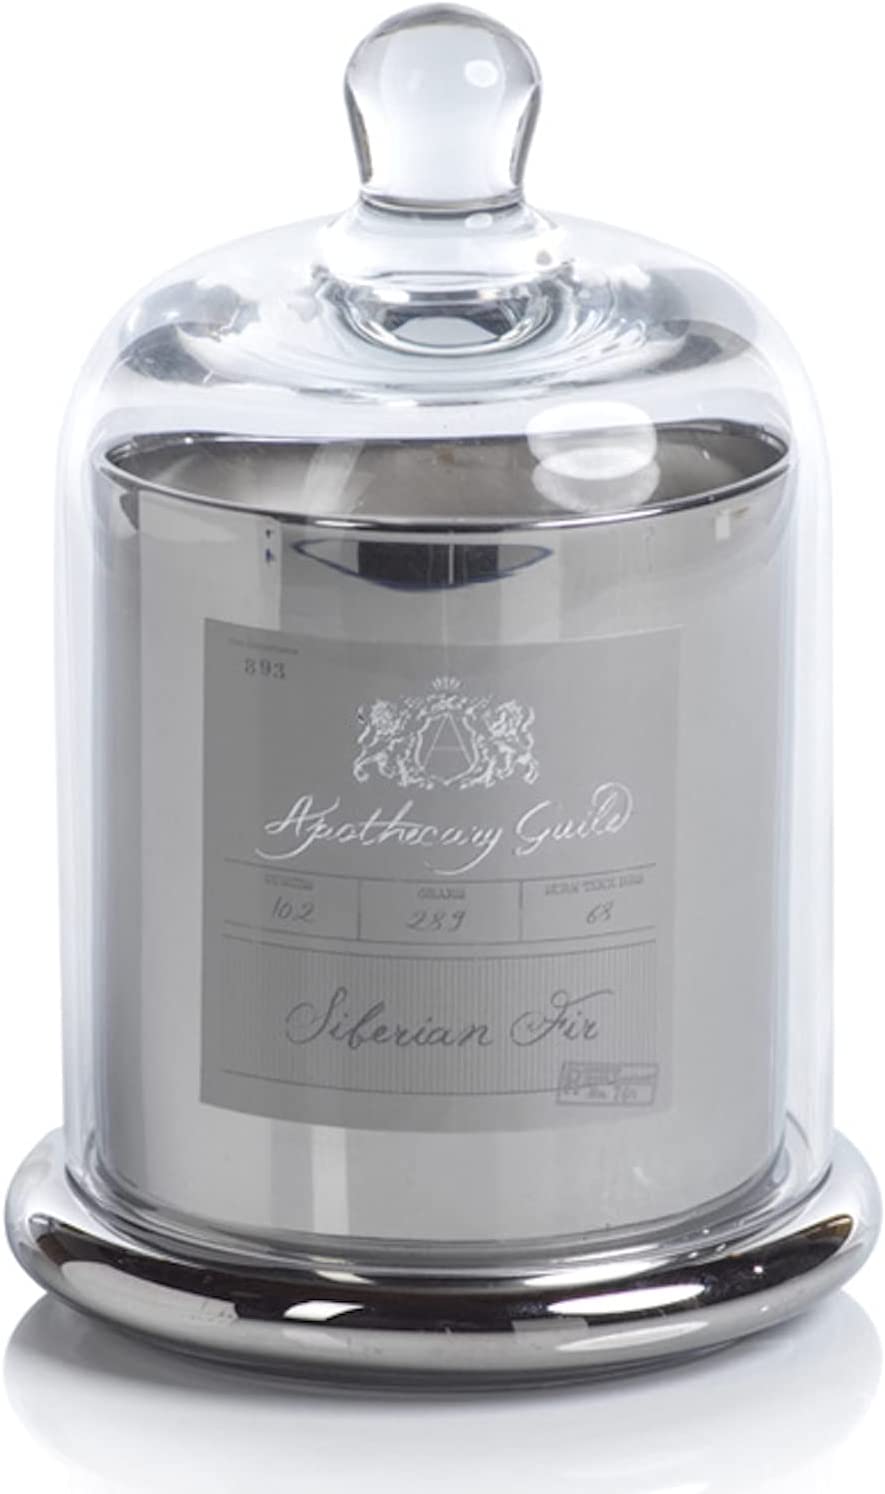 SIBERIAN FIR Zodax Apothecary Guild Silver Scented 10 oz Jar Candle with Dome